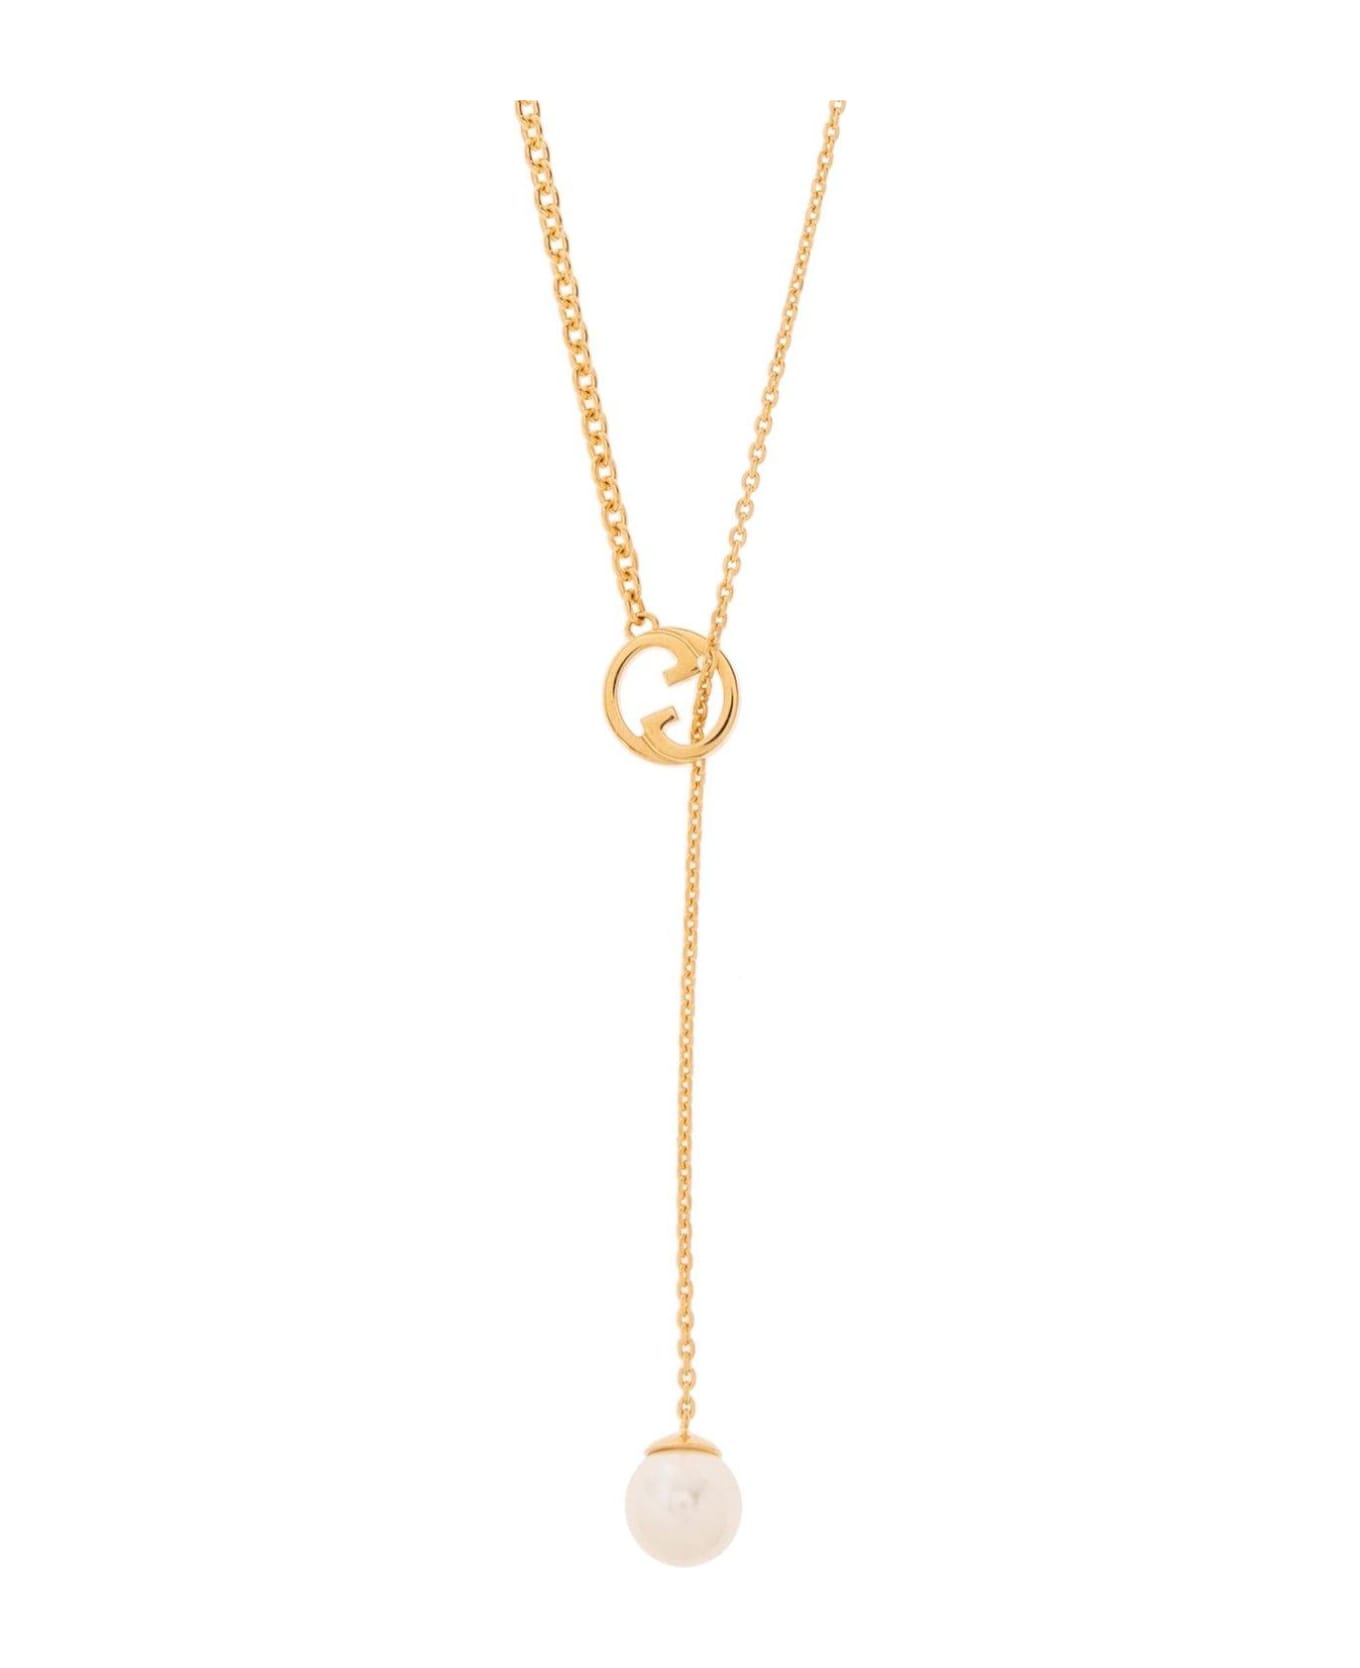 Gucci Blondie Embellished Drop Necklace - Cream ネックレス